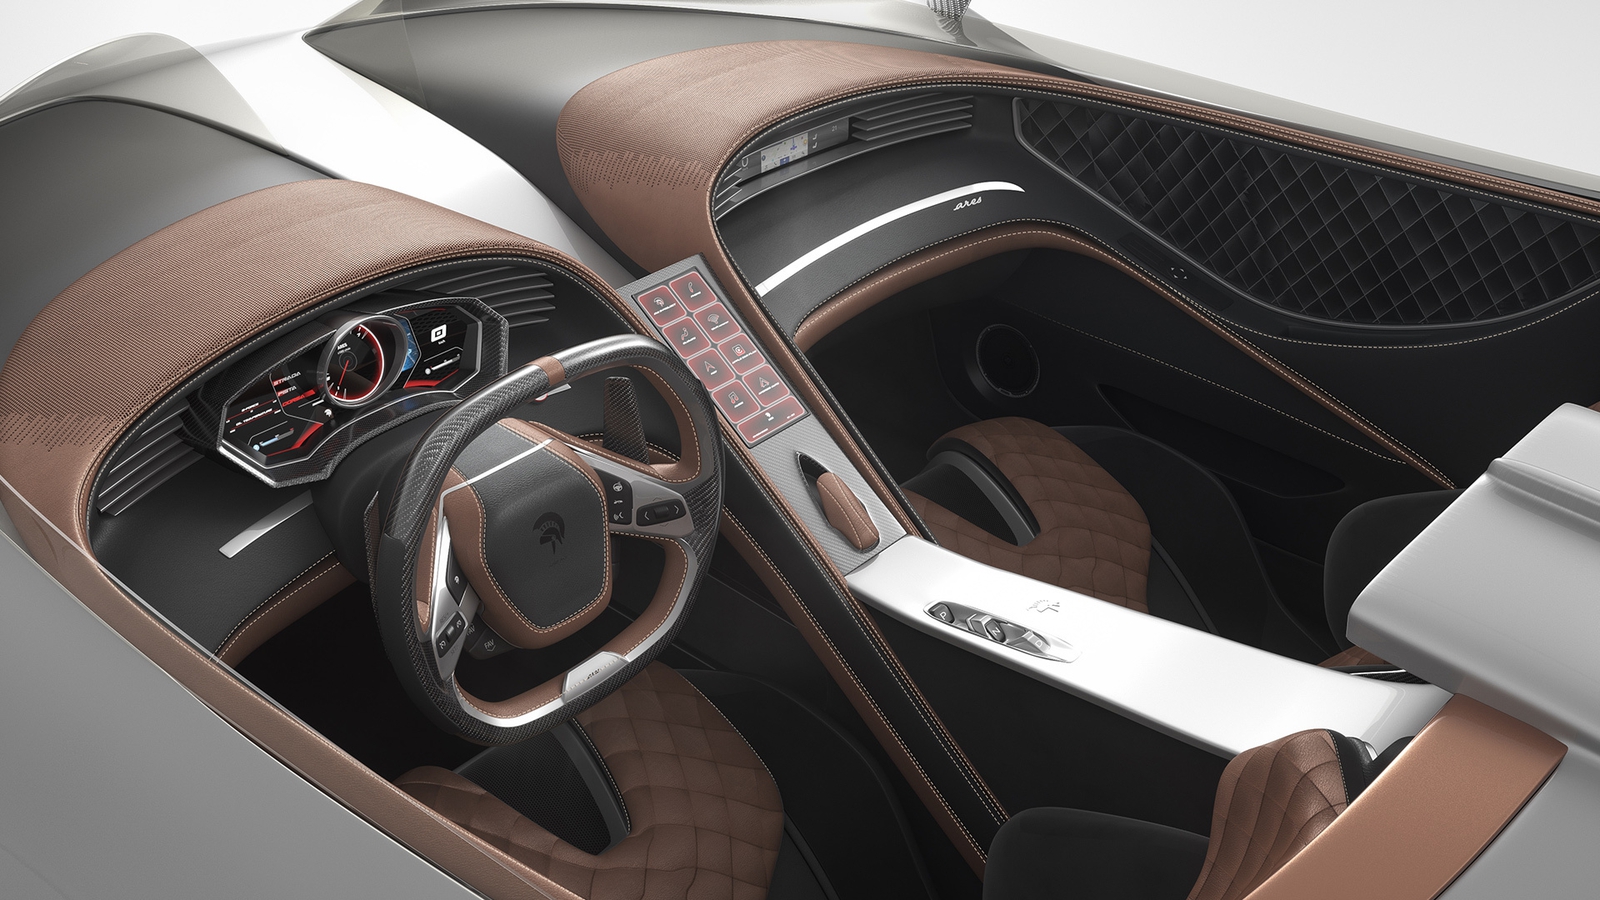 https___www.aresdesign.com_static_commons_imgs_S1-project-spyder-interior1